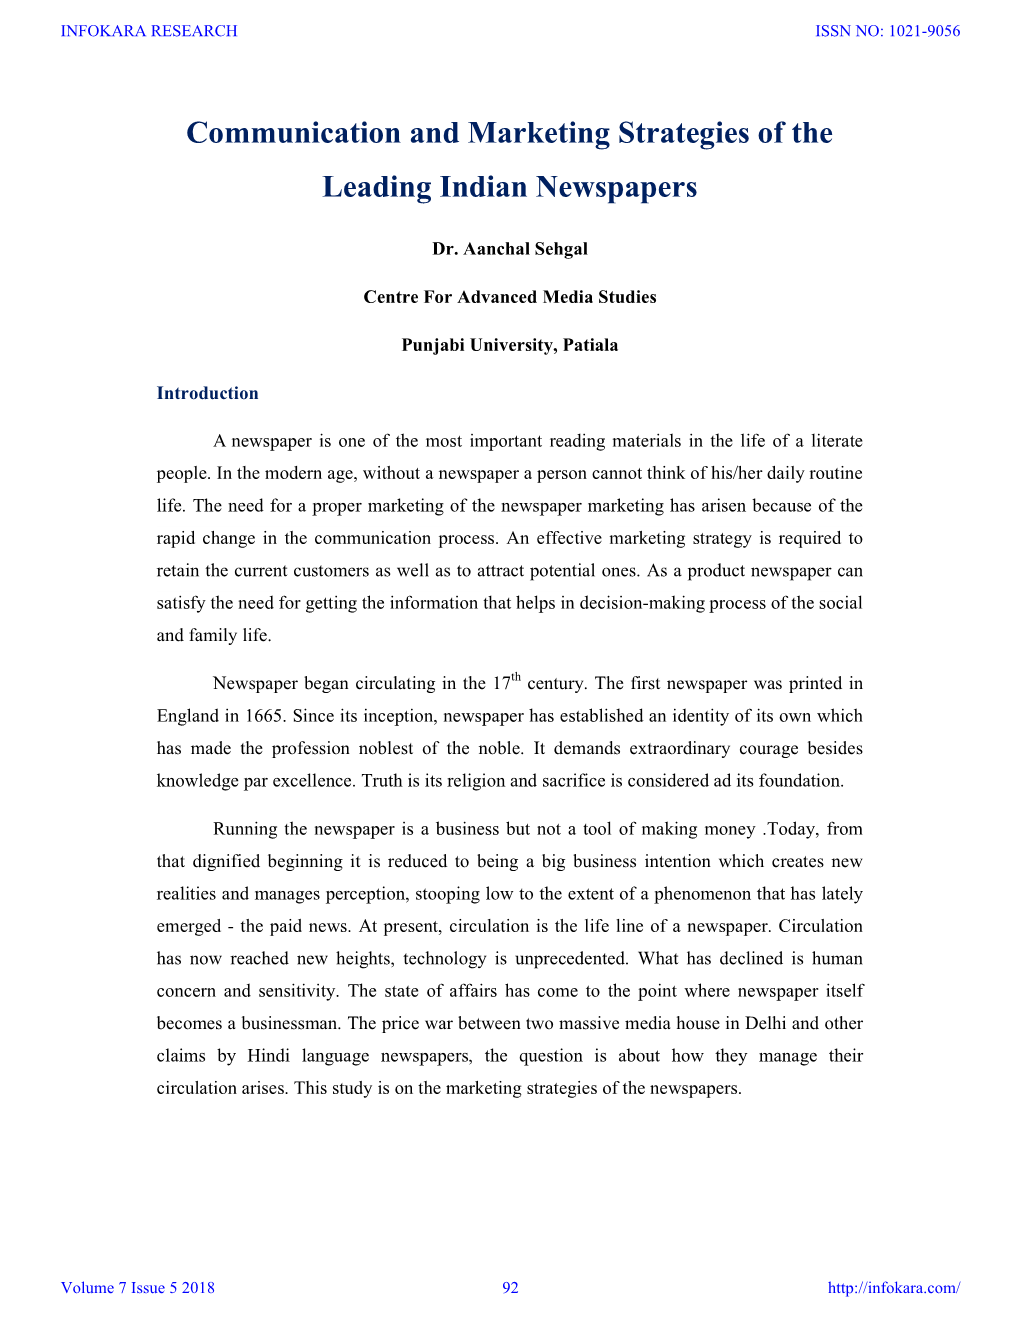 Communication and Marketing Strategies of the Leading Indian Newspapers